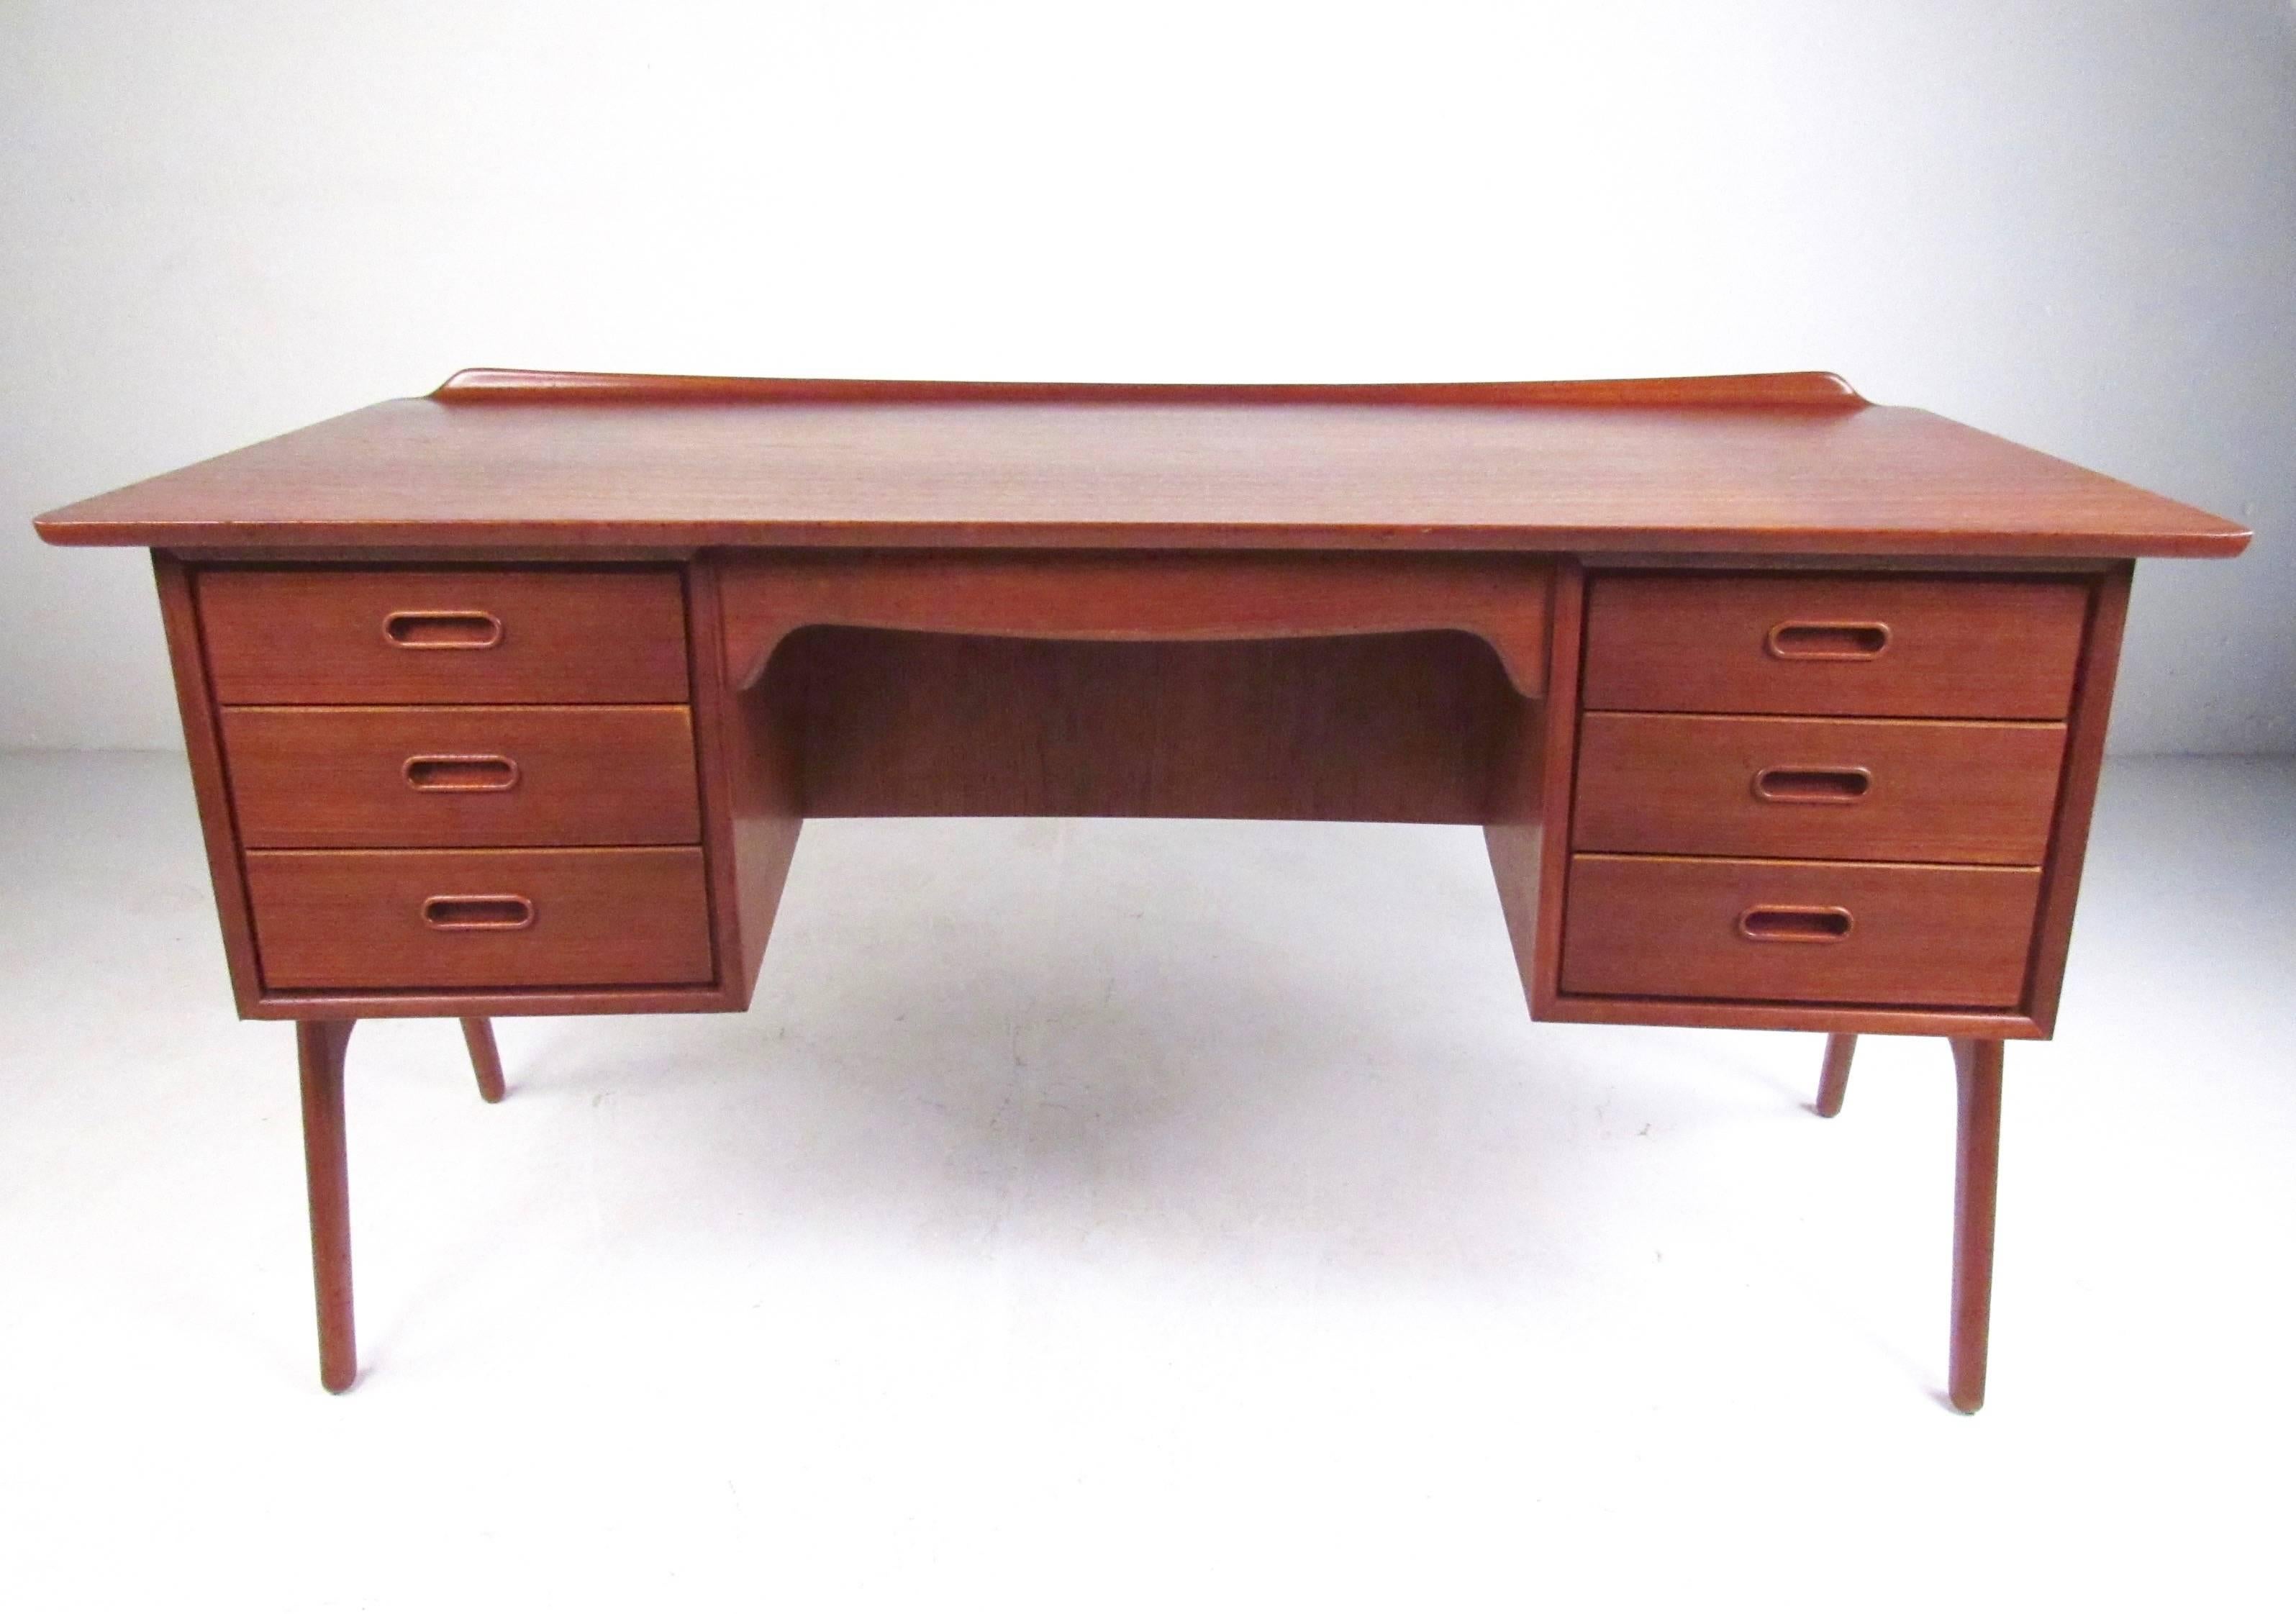 This stunning teak desk by Svend Madsen for Sigurd Hansen makes a beautiful desk for any office, showcasing the finest points of midcentury Scandinavian design. Sculpted legs, raised back edge, and open shelf back make this an impressive writing